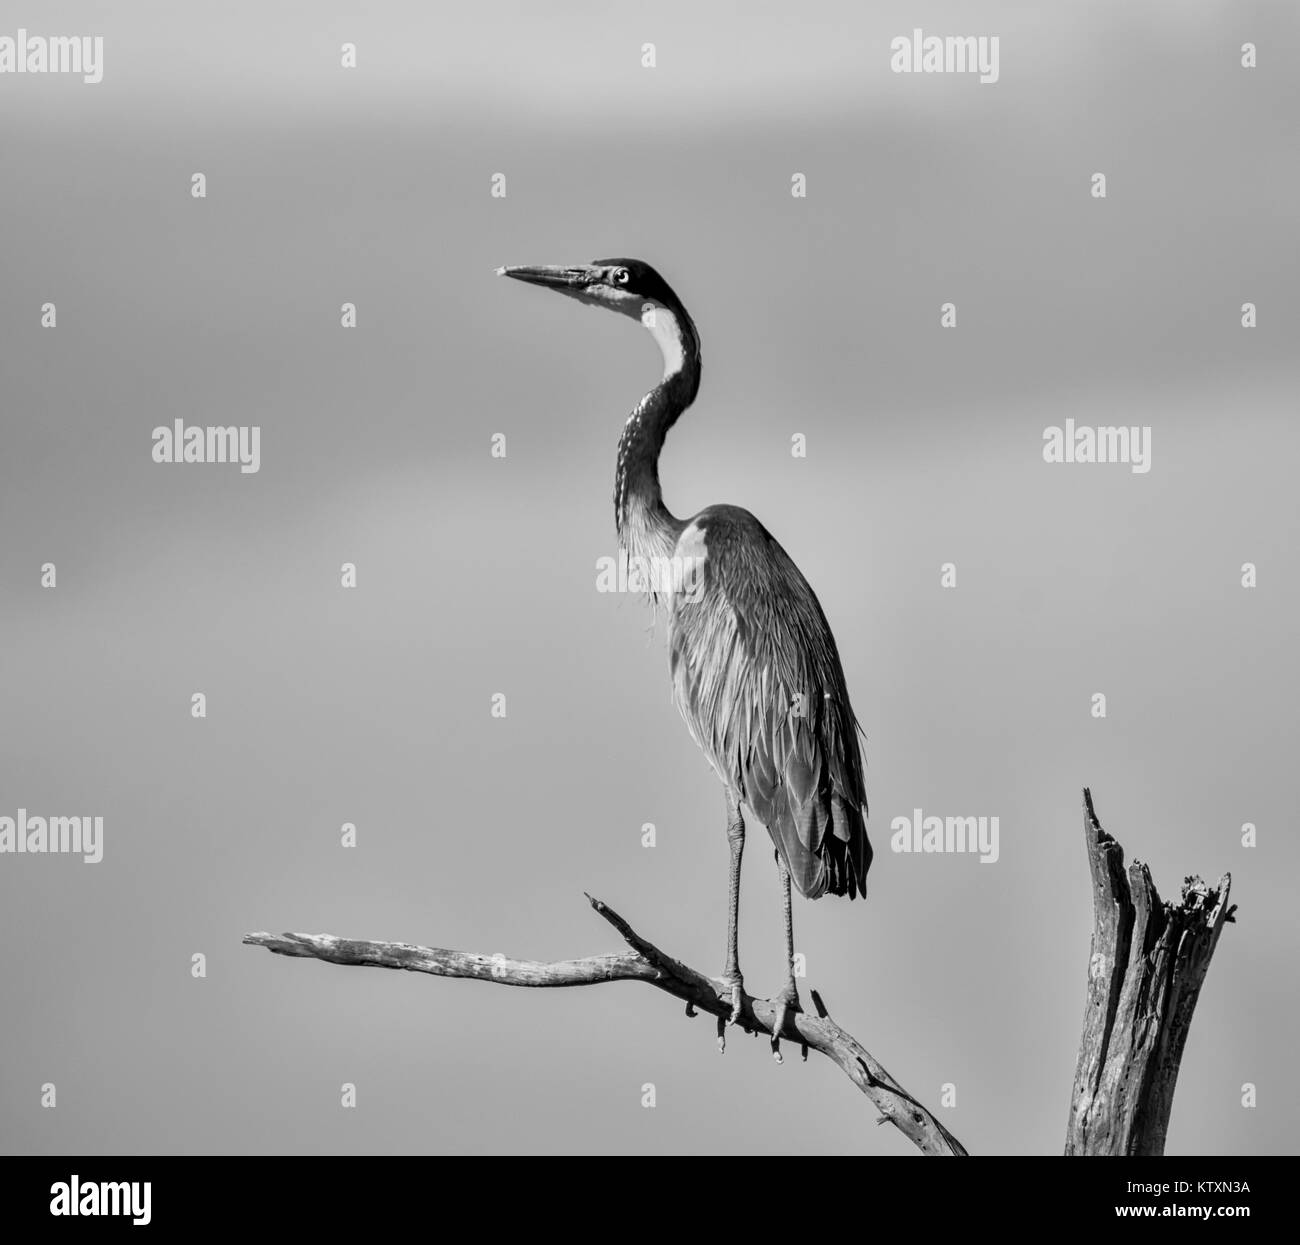 A Black-headed Heron standing on a dead tree Stock Photo